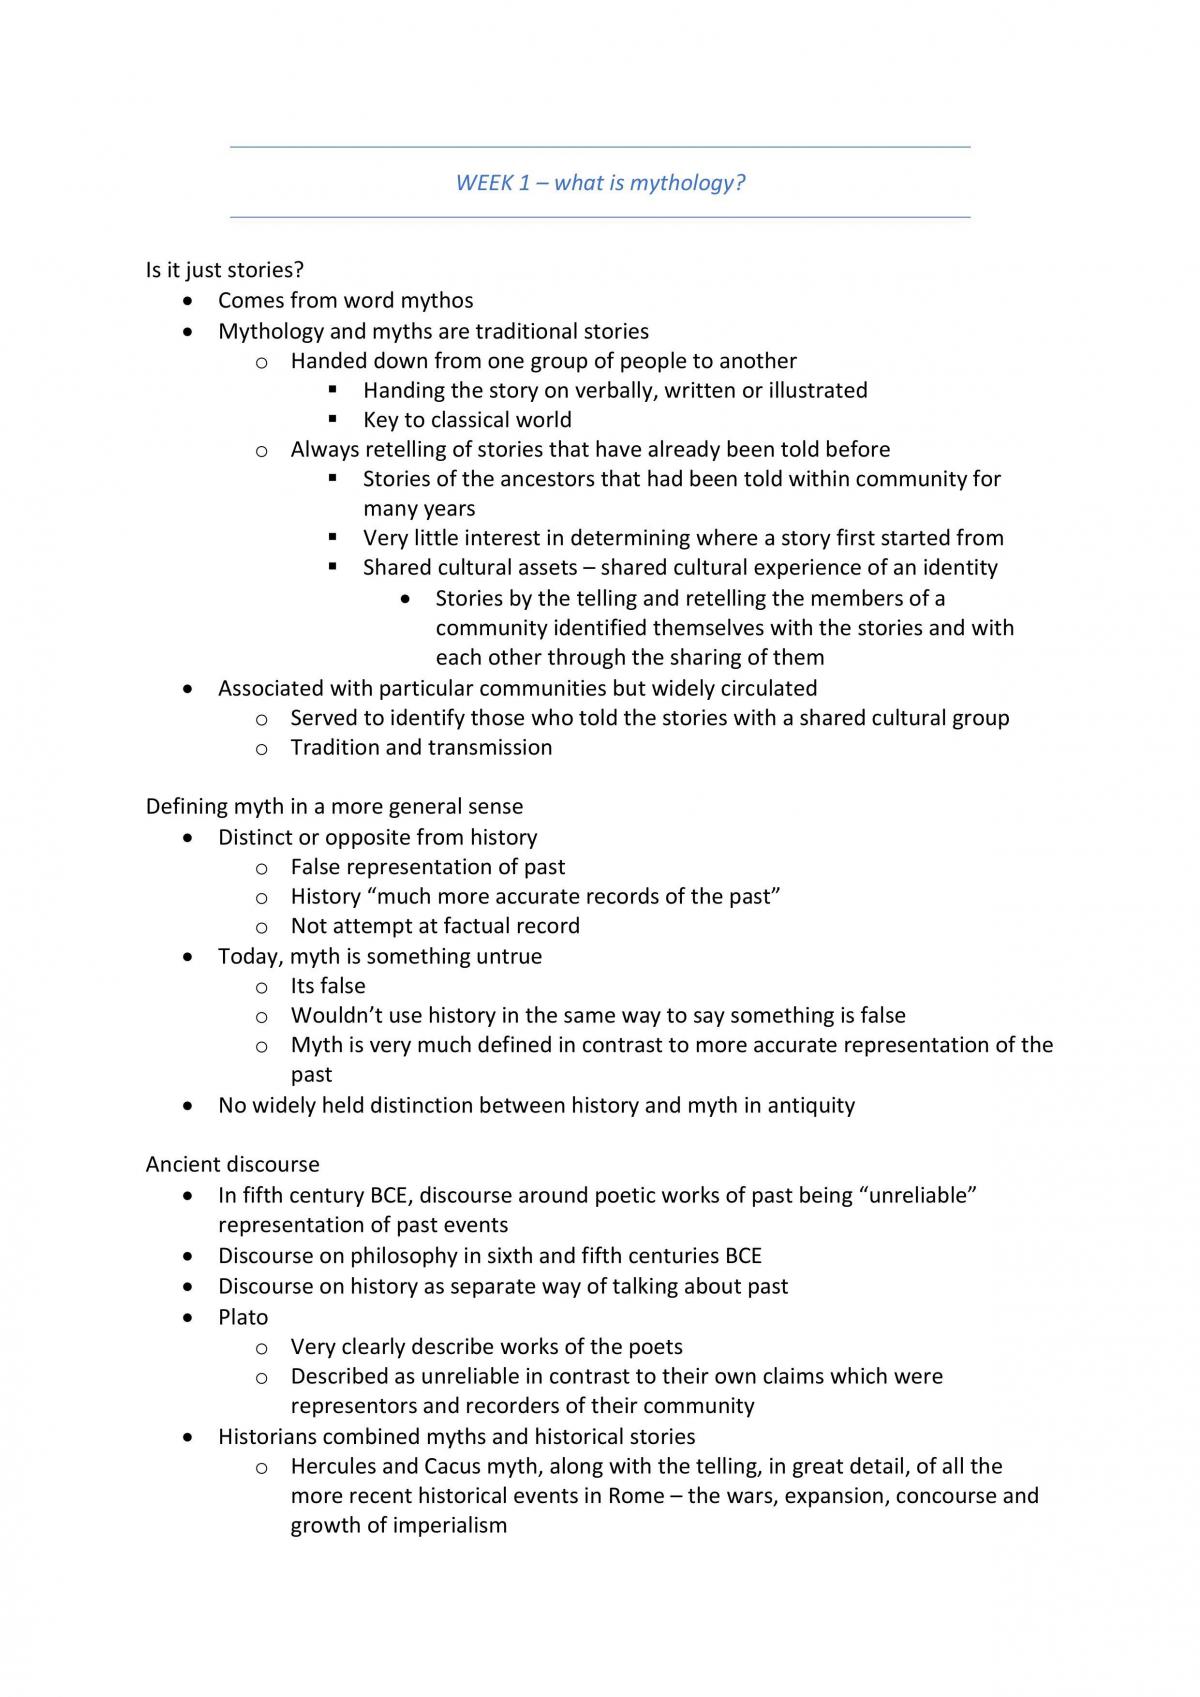 Lectures and Essay Notes - Page 8